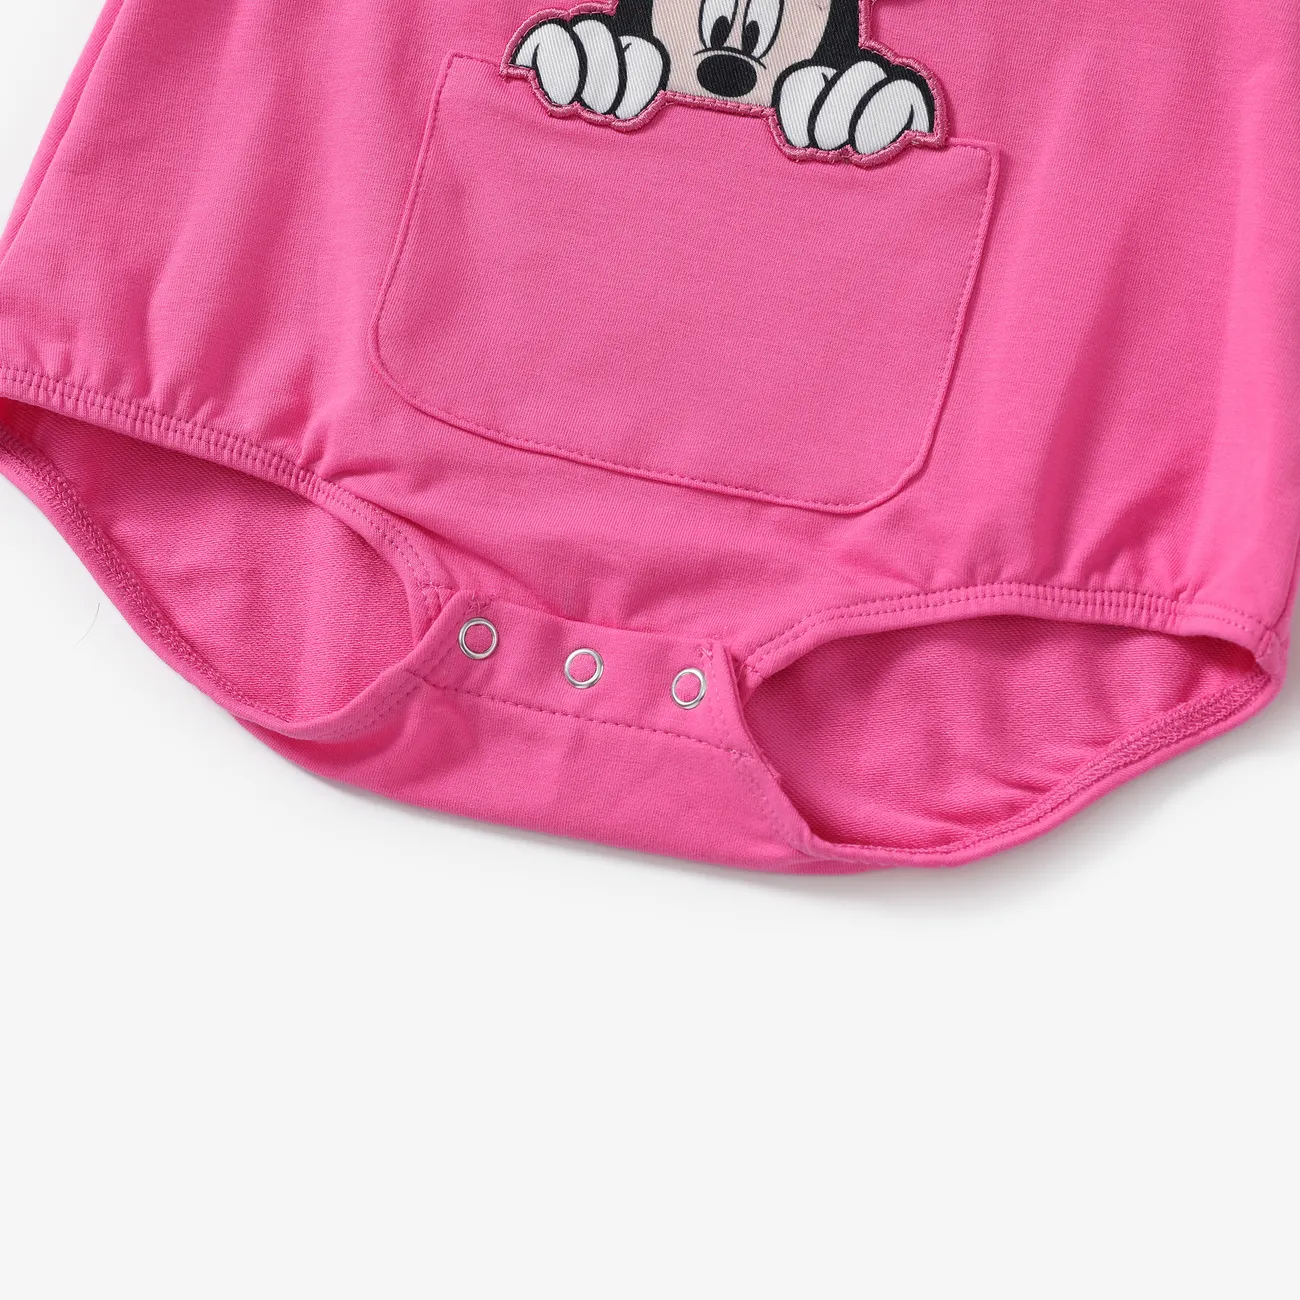 Disney Mickey and Friends Baby Boys/Girls 1pc Cotton Patch Embroidered Overalls  Pink big image 1